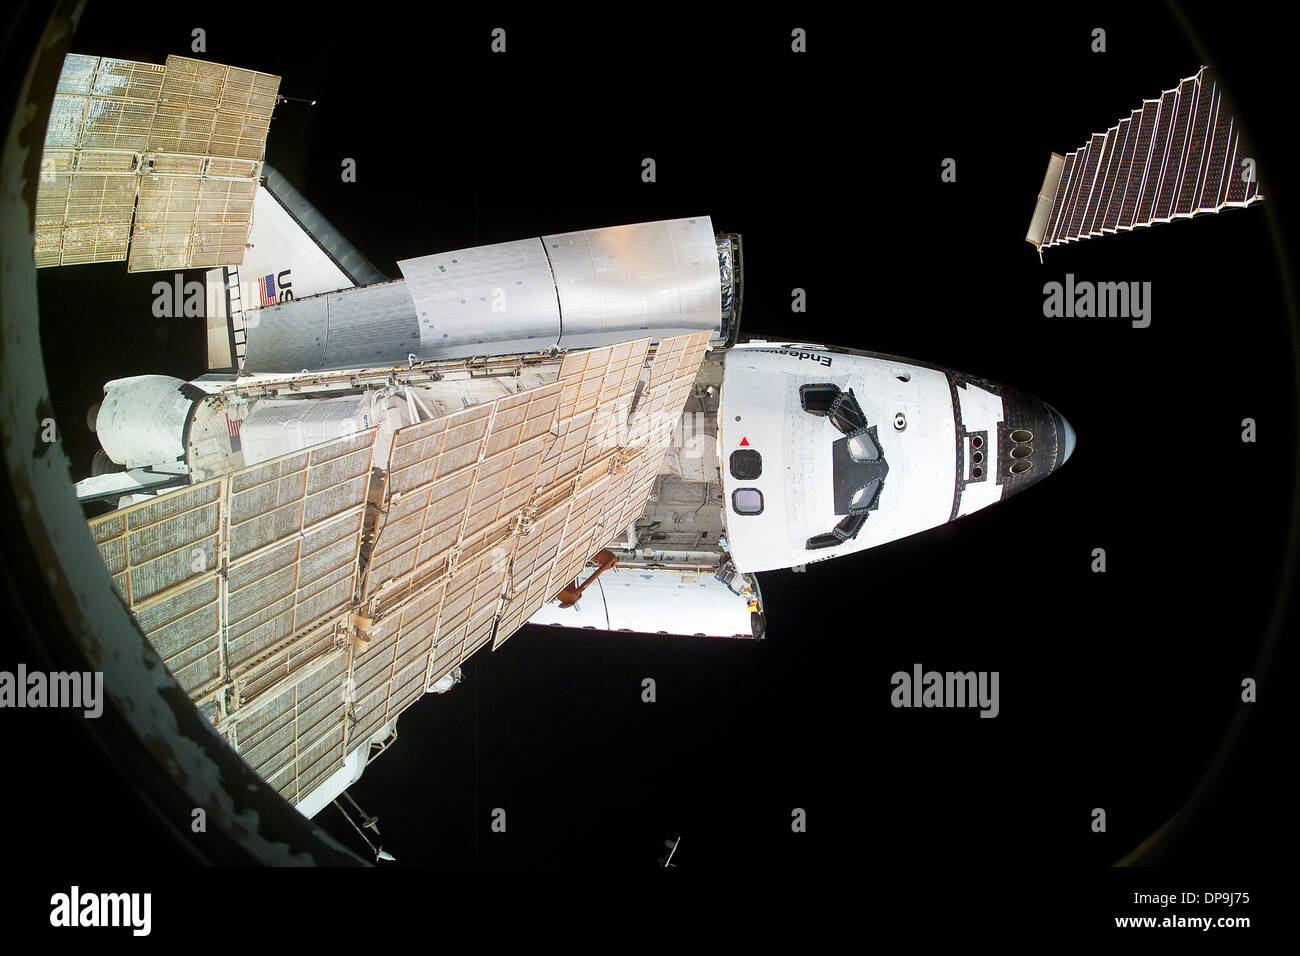 The Orbiter Endeavour While Docked To The Mir Space Station During Sts 89 Viewed From The 